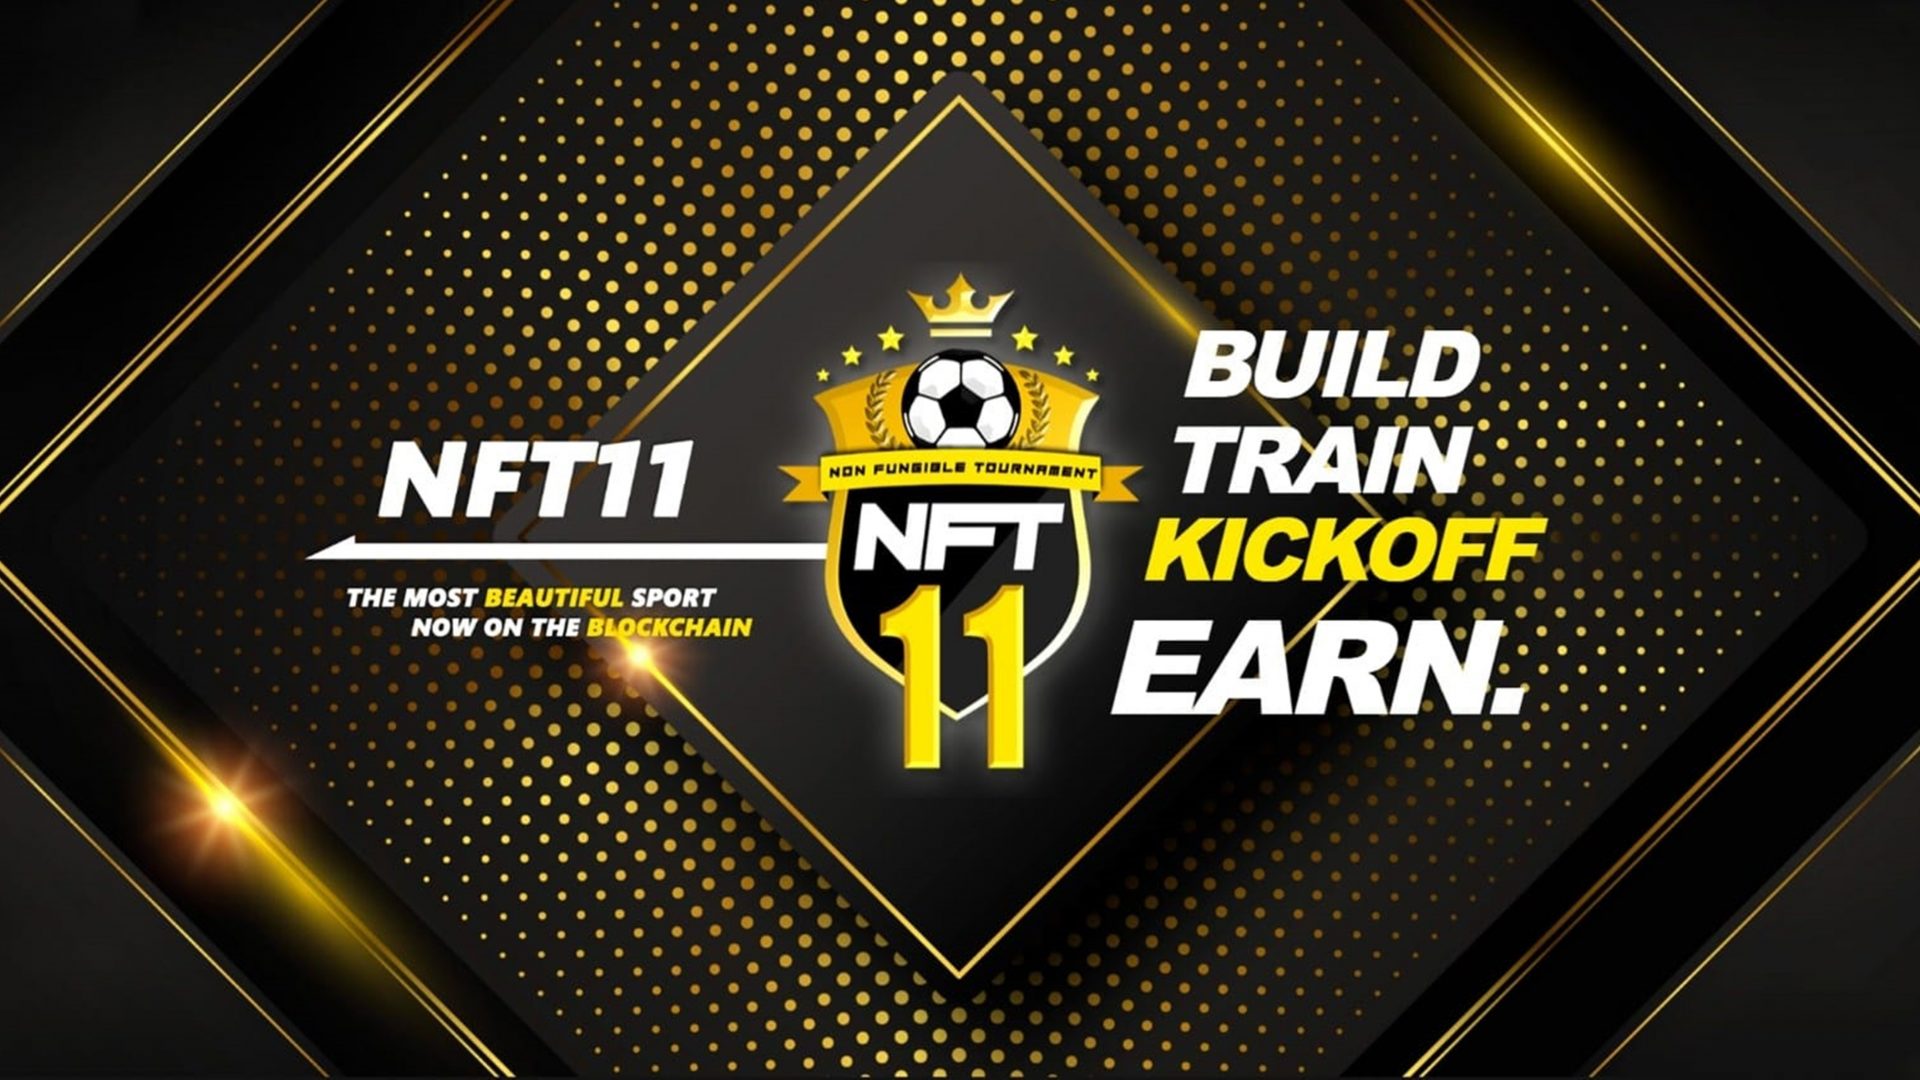 NFT11: The Football Manager Game Where You Own (And Control) A Squad Of Footballers